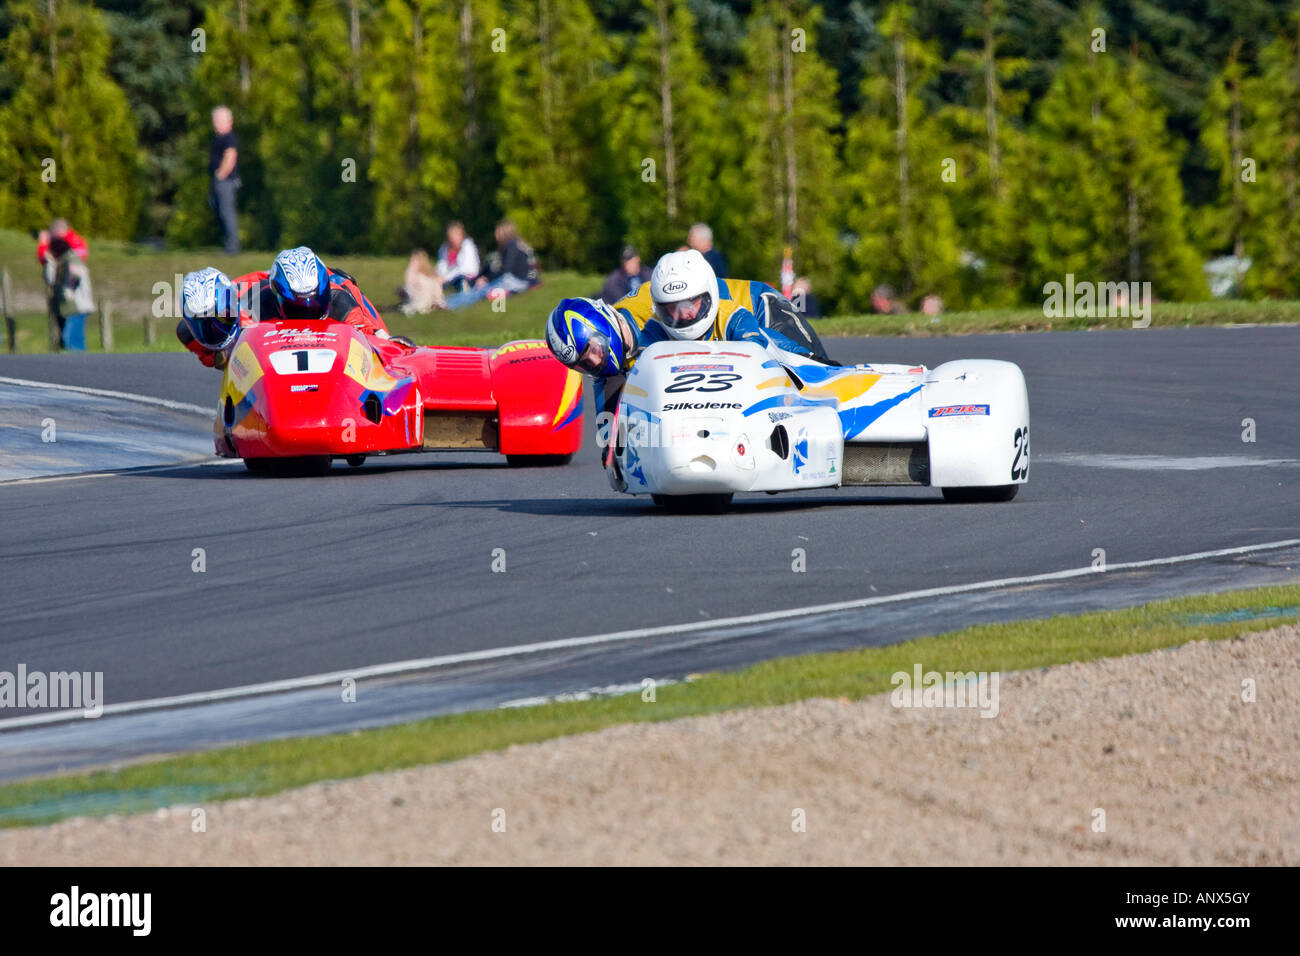 Motorcycle and sidecar racing at Knockhill circuit FIfe Scotland Stock Photo